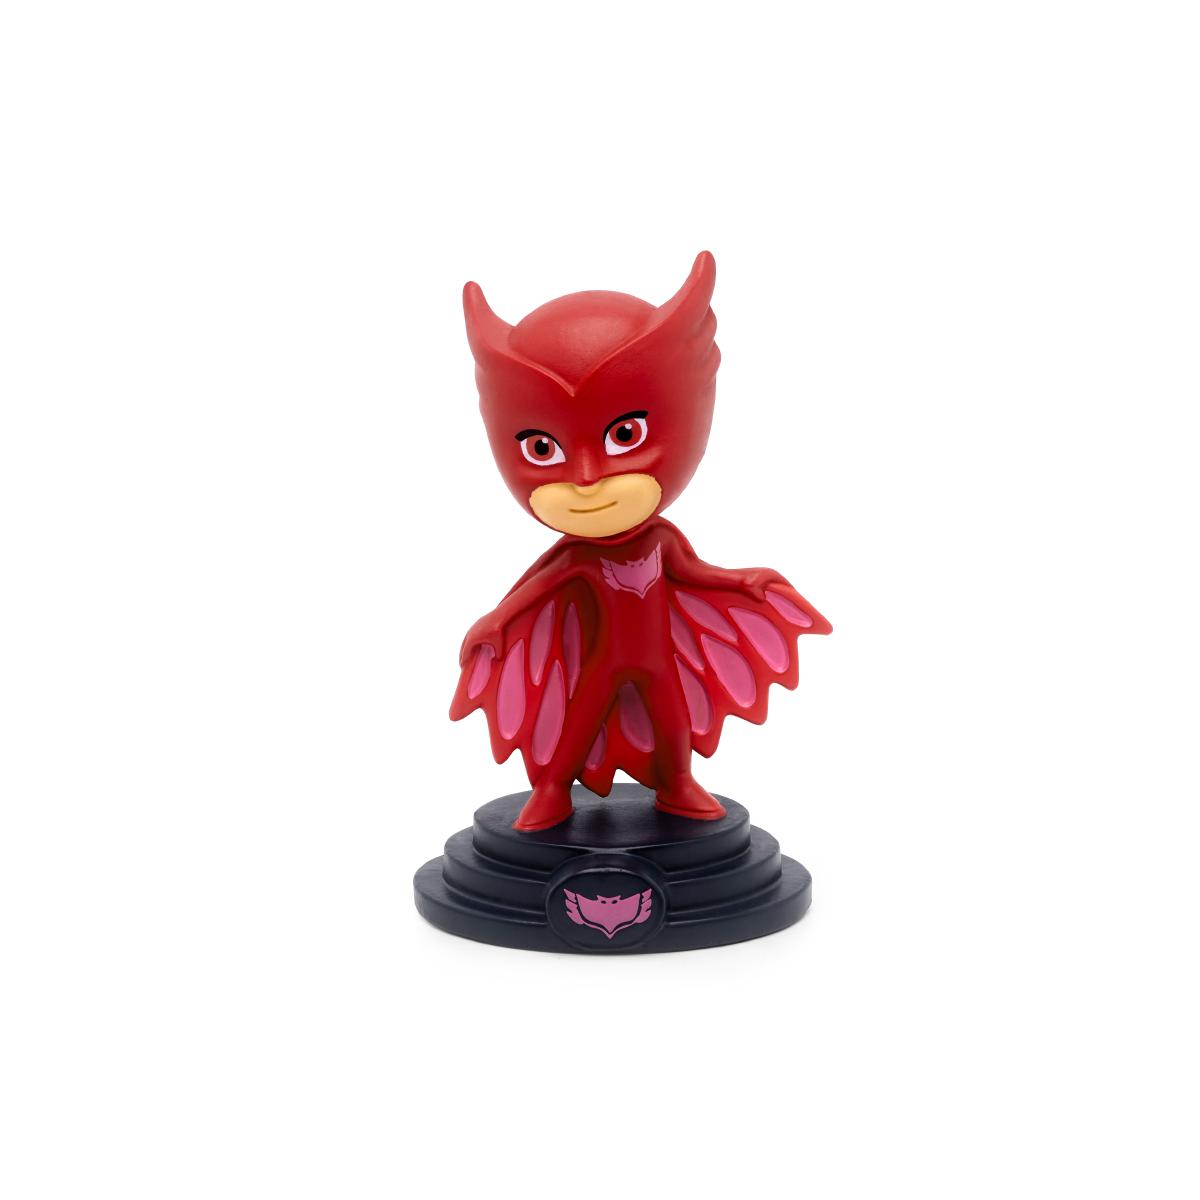 Tonies Pj Masks Owlette - Audio Character for use with Toniebox Player